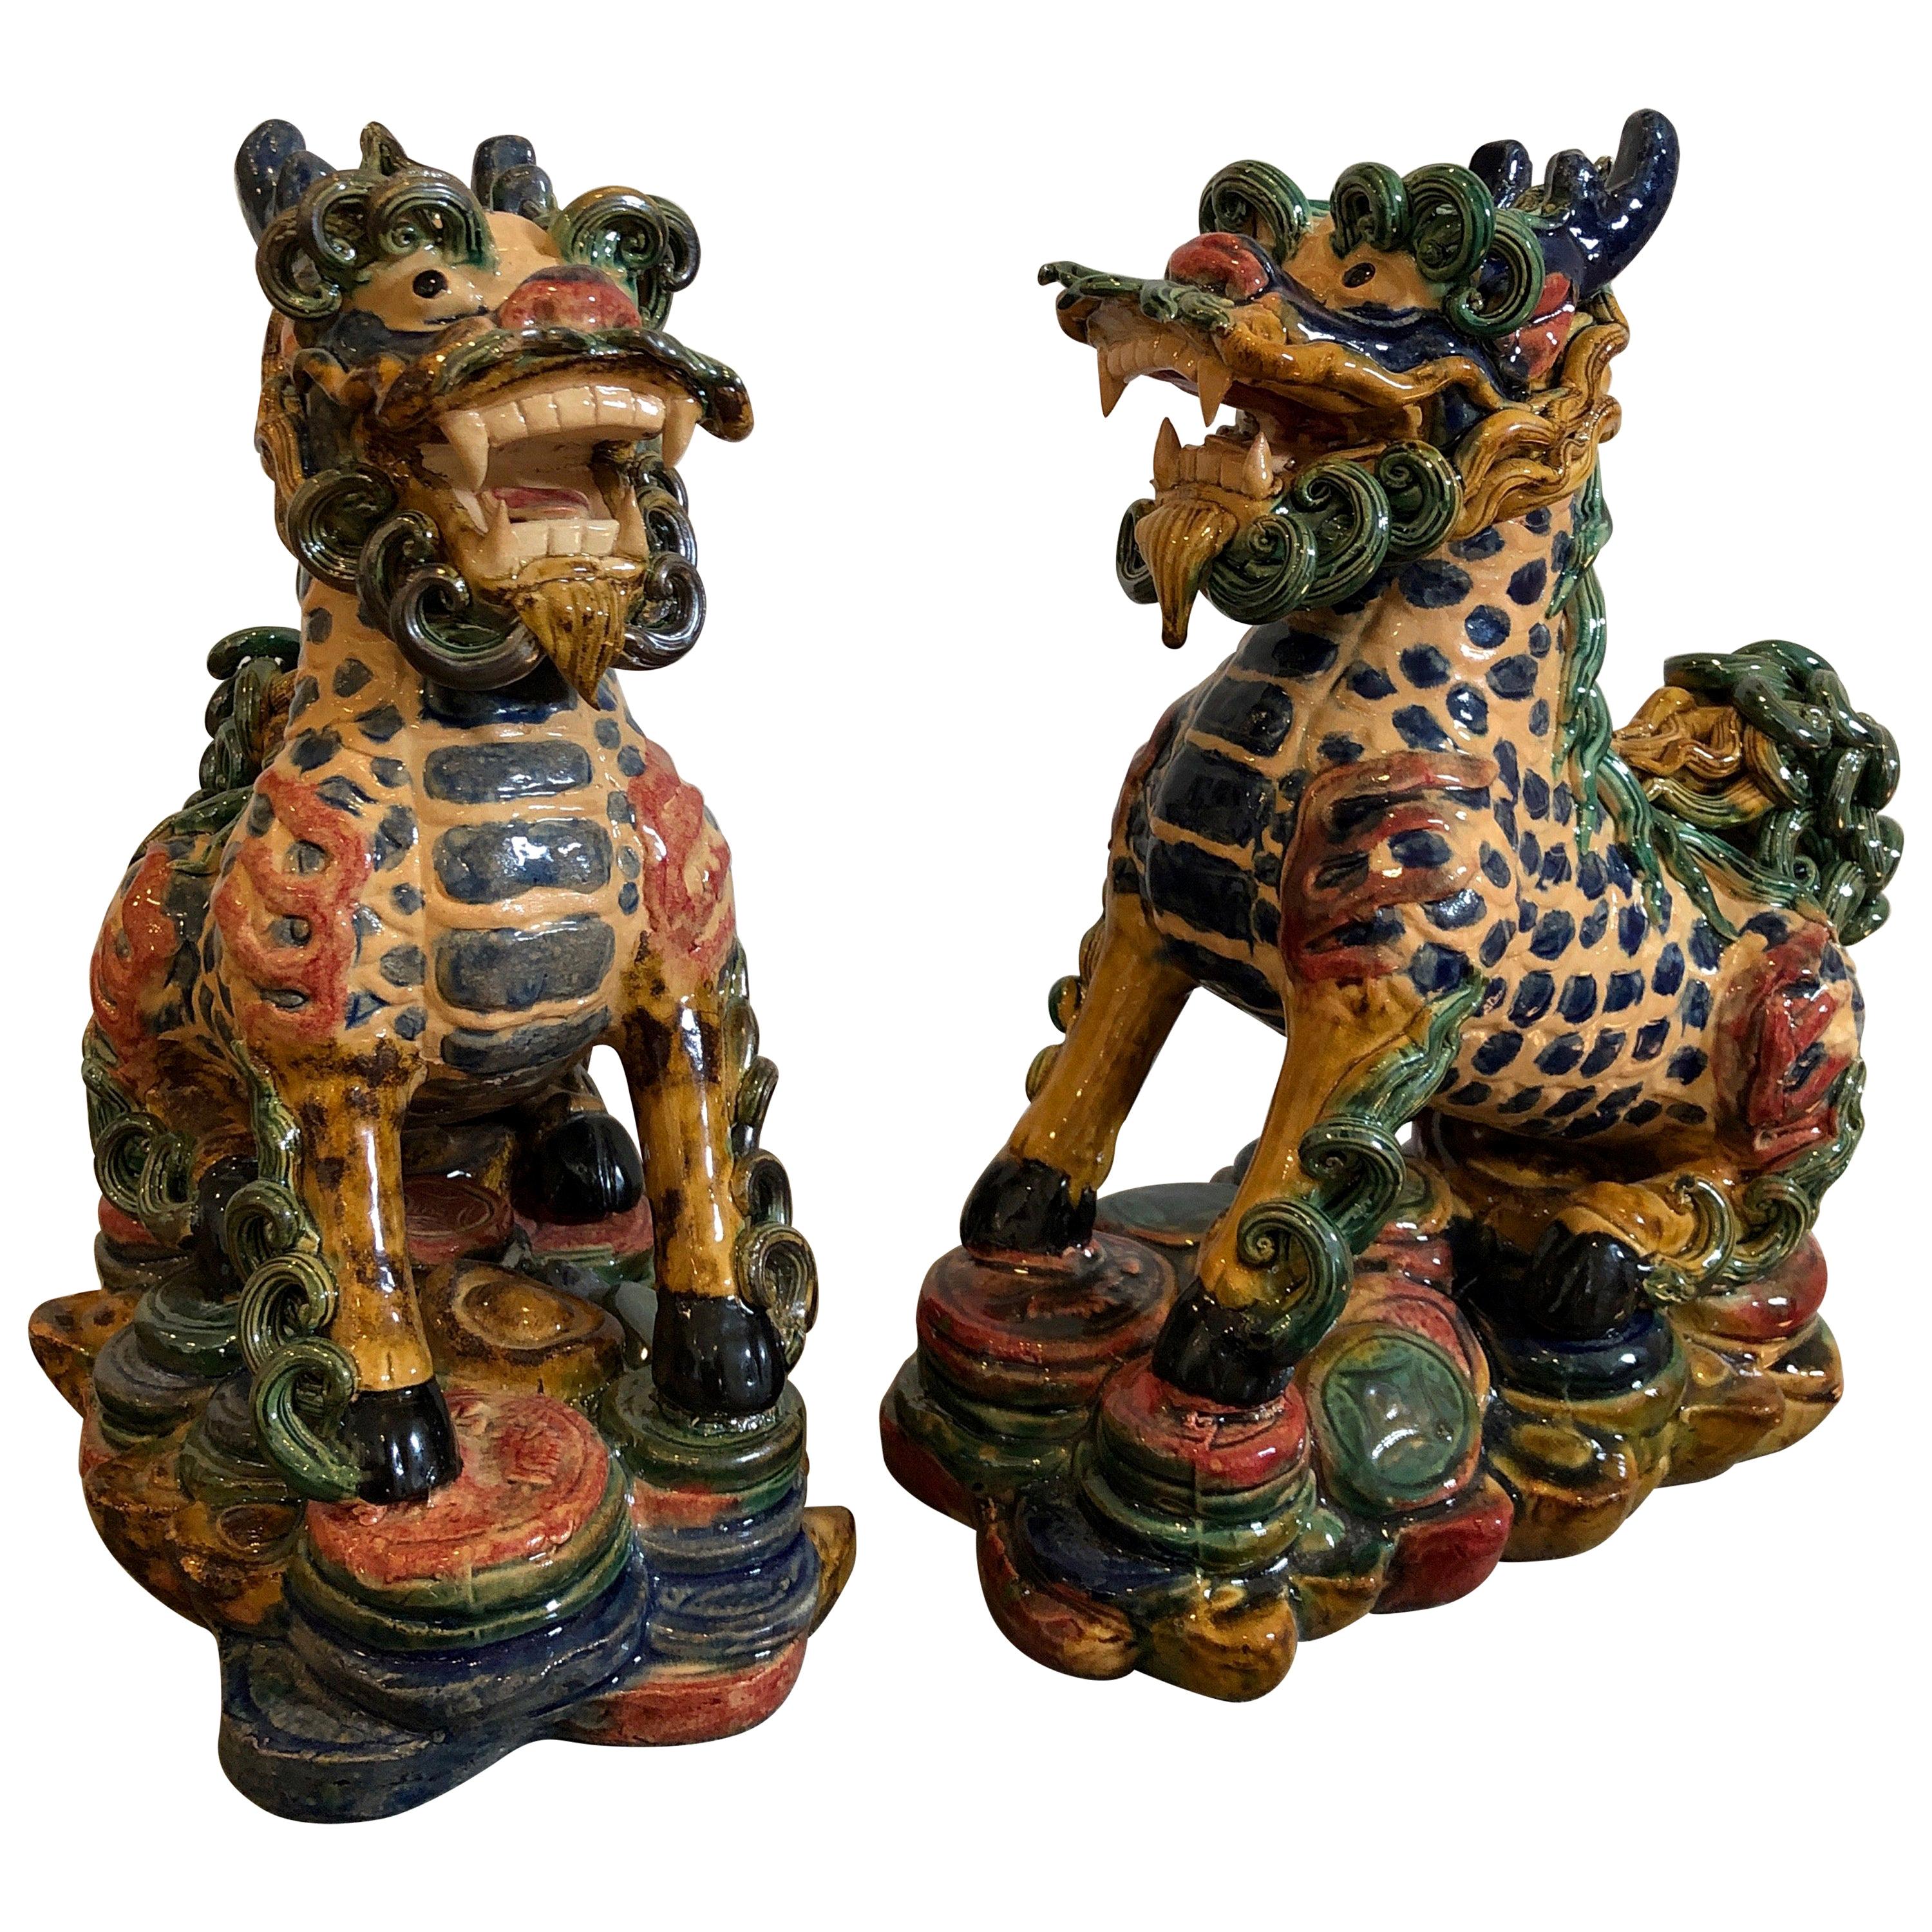 What is the meaning of foo dogs?